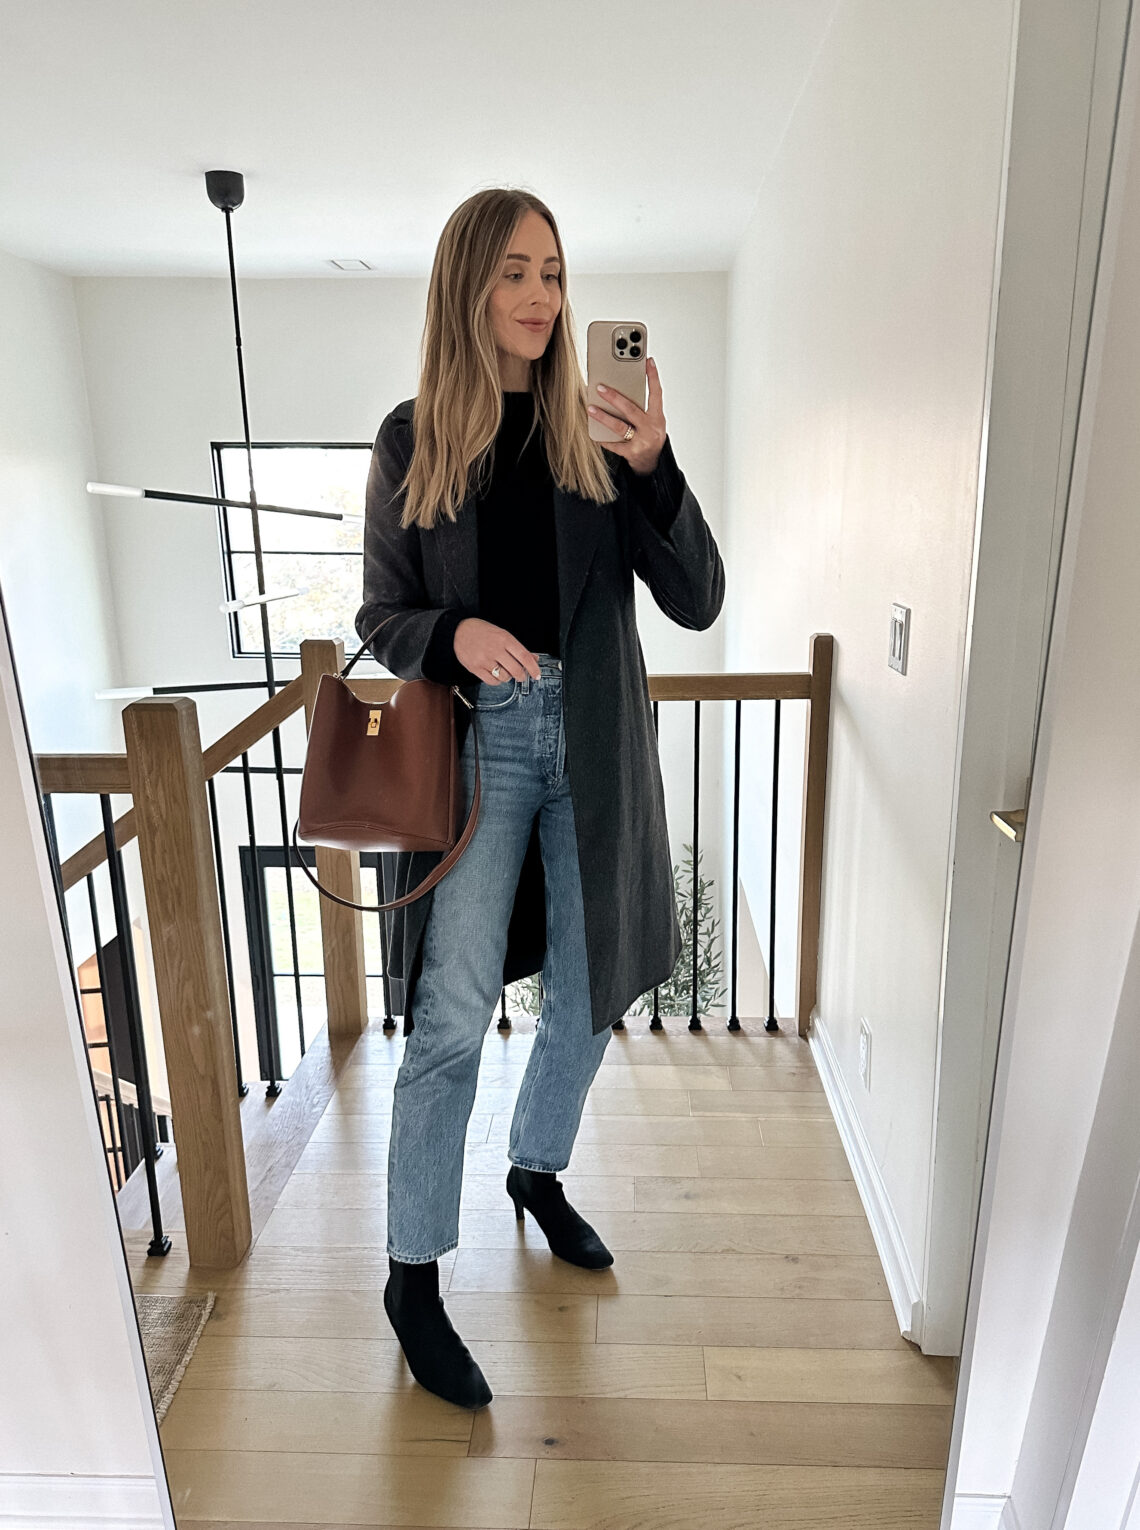 Fashion Jackson Wearing Max Mara Pauli Belted Virgin Wool Coat Charcoal Black Sweater AGOLDE 90s Jeans Toteme Black suede ankle boots Celine Bucket 16 Handbag Tan Winter Outfit Fall Outfit Business Casual Outfit